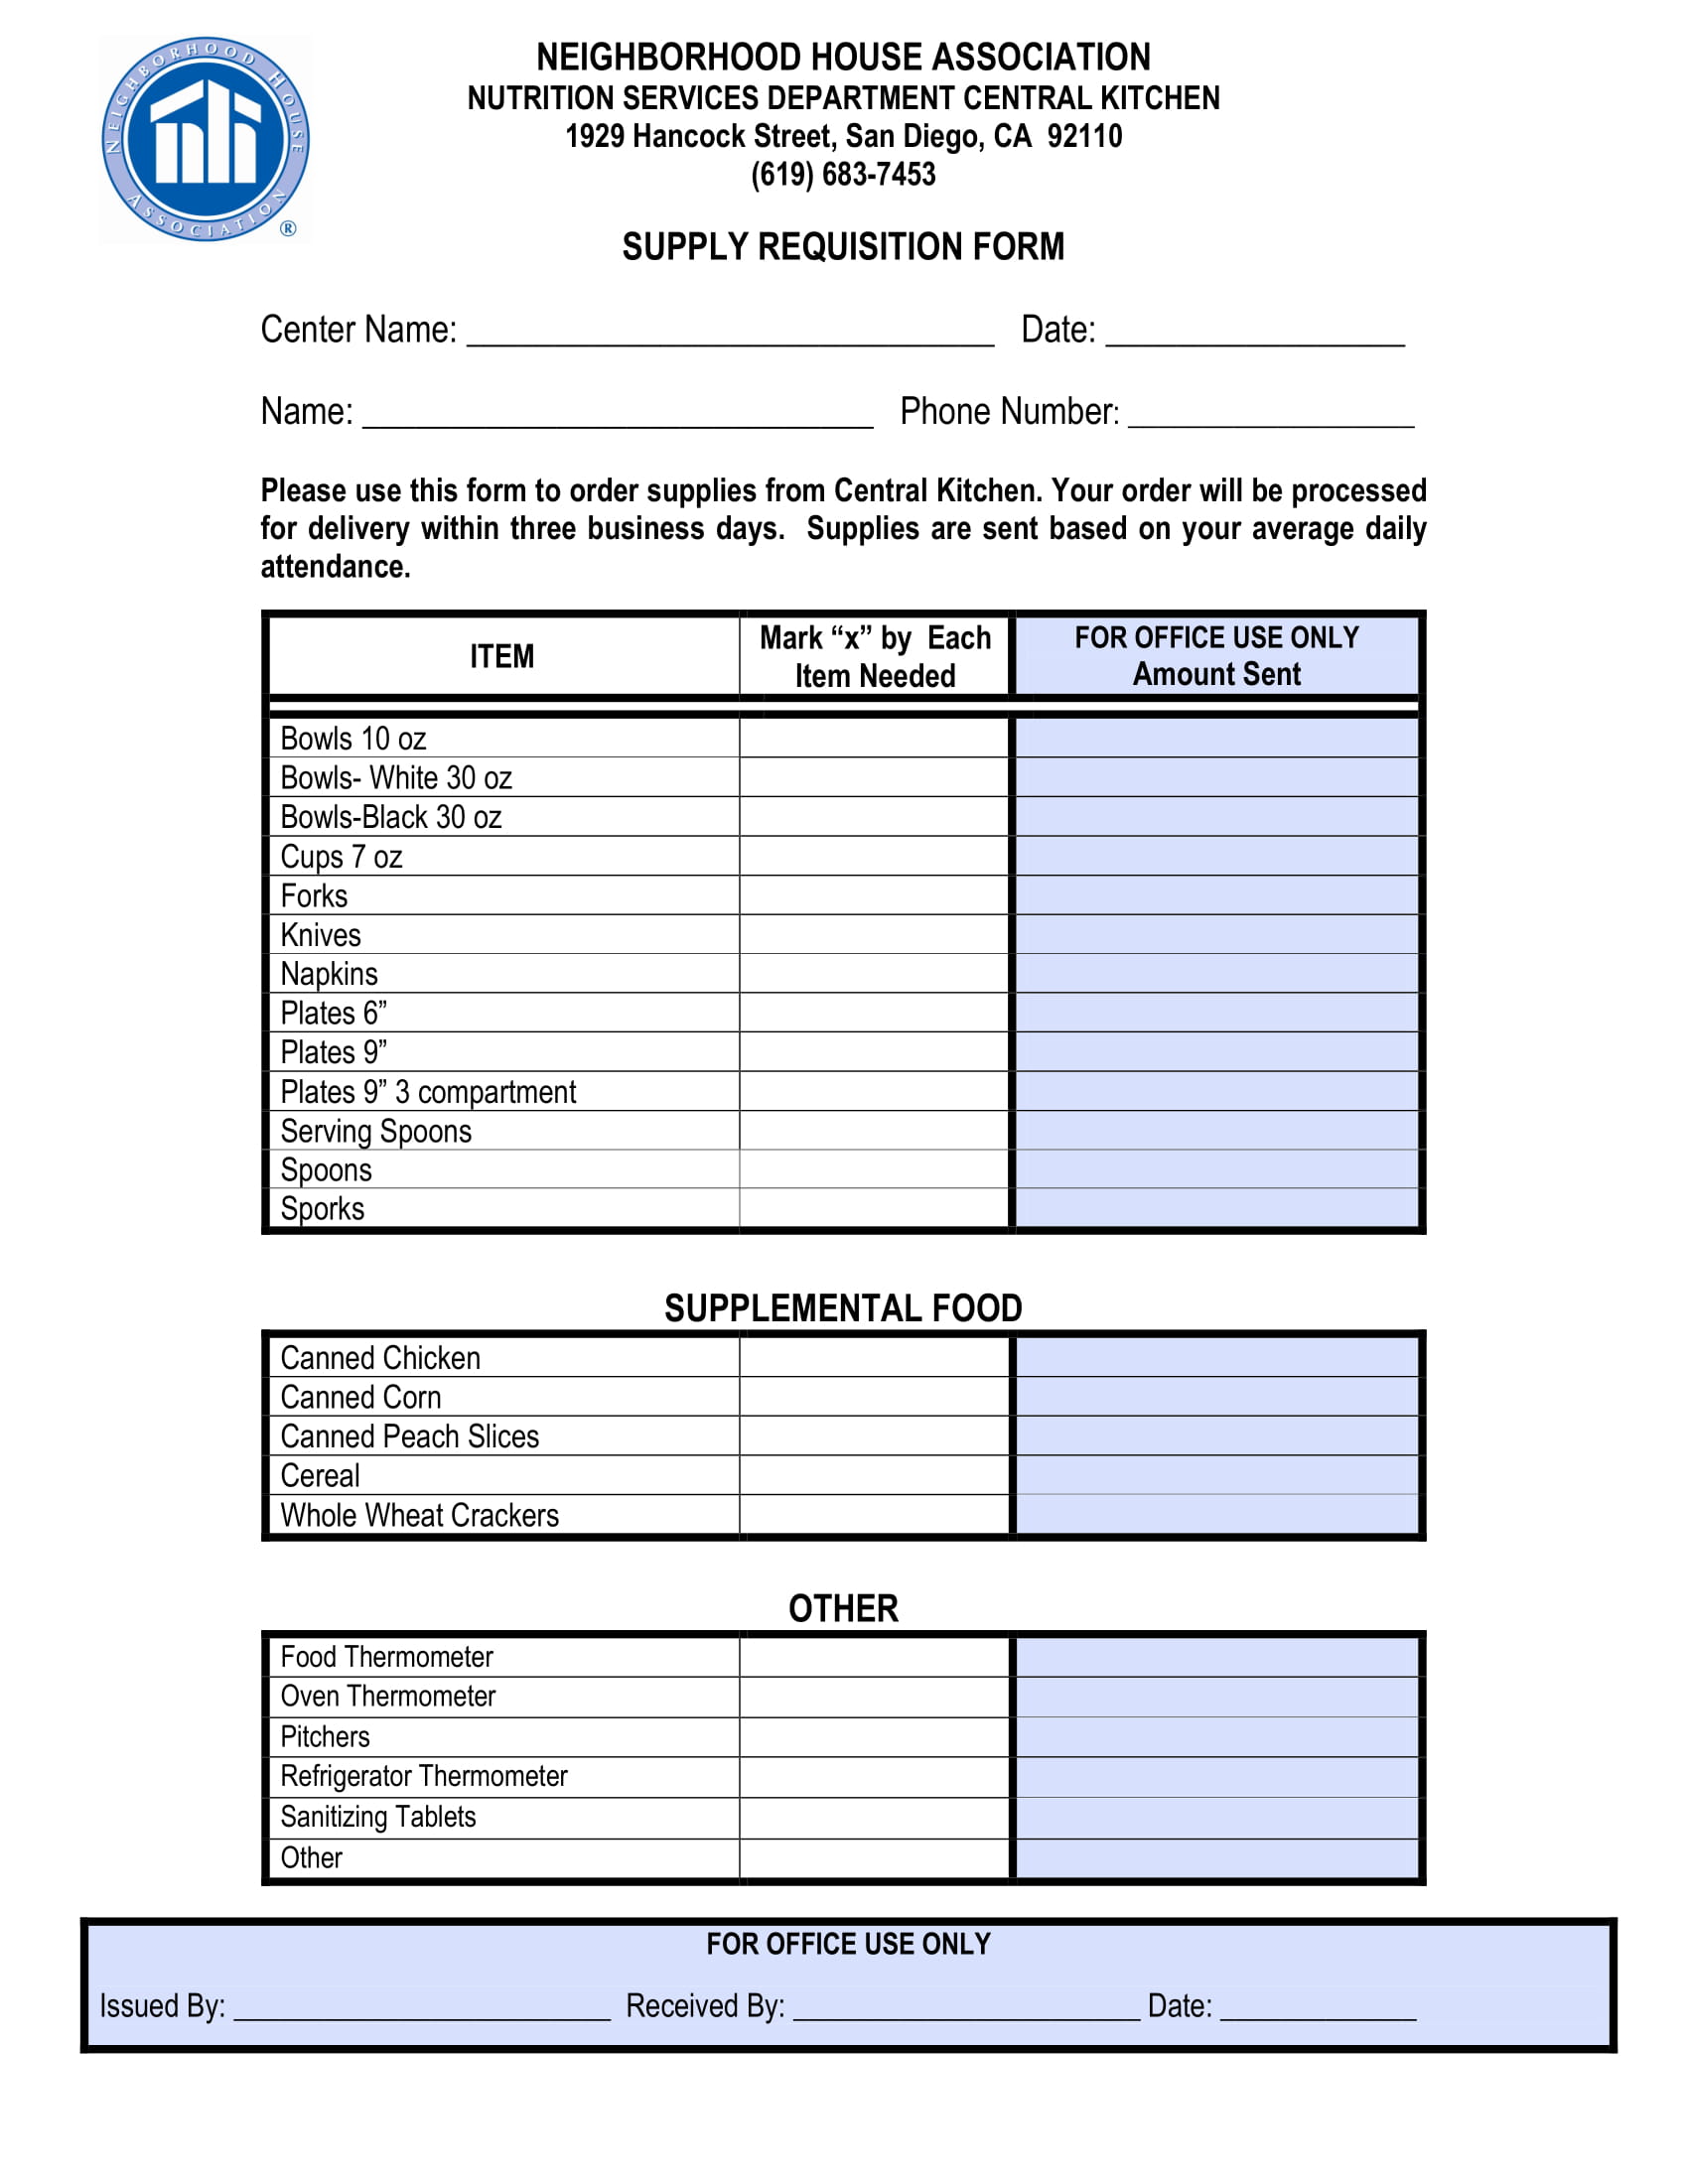 supply requisition form 1